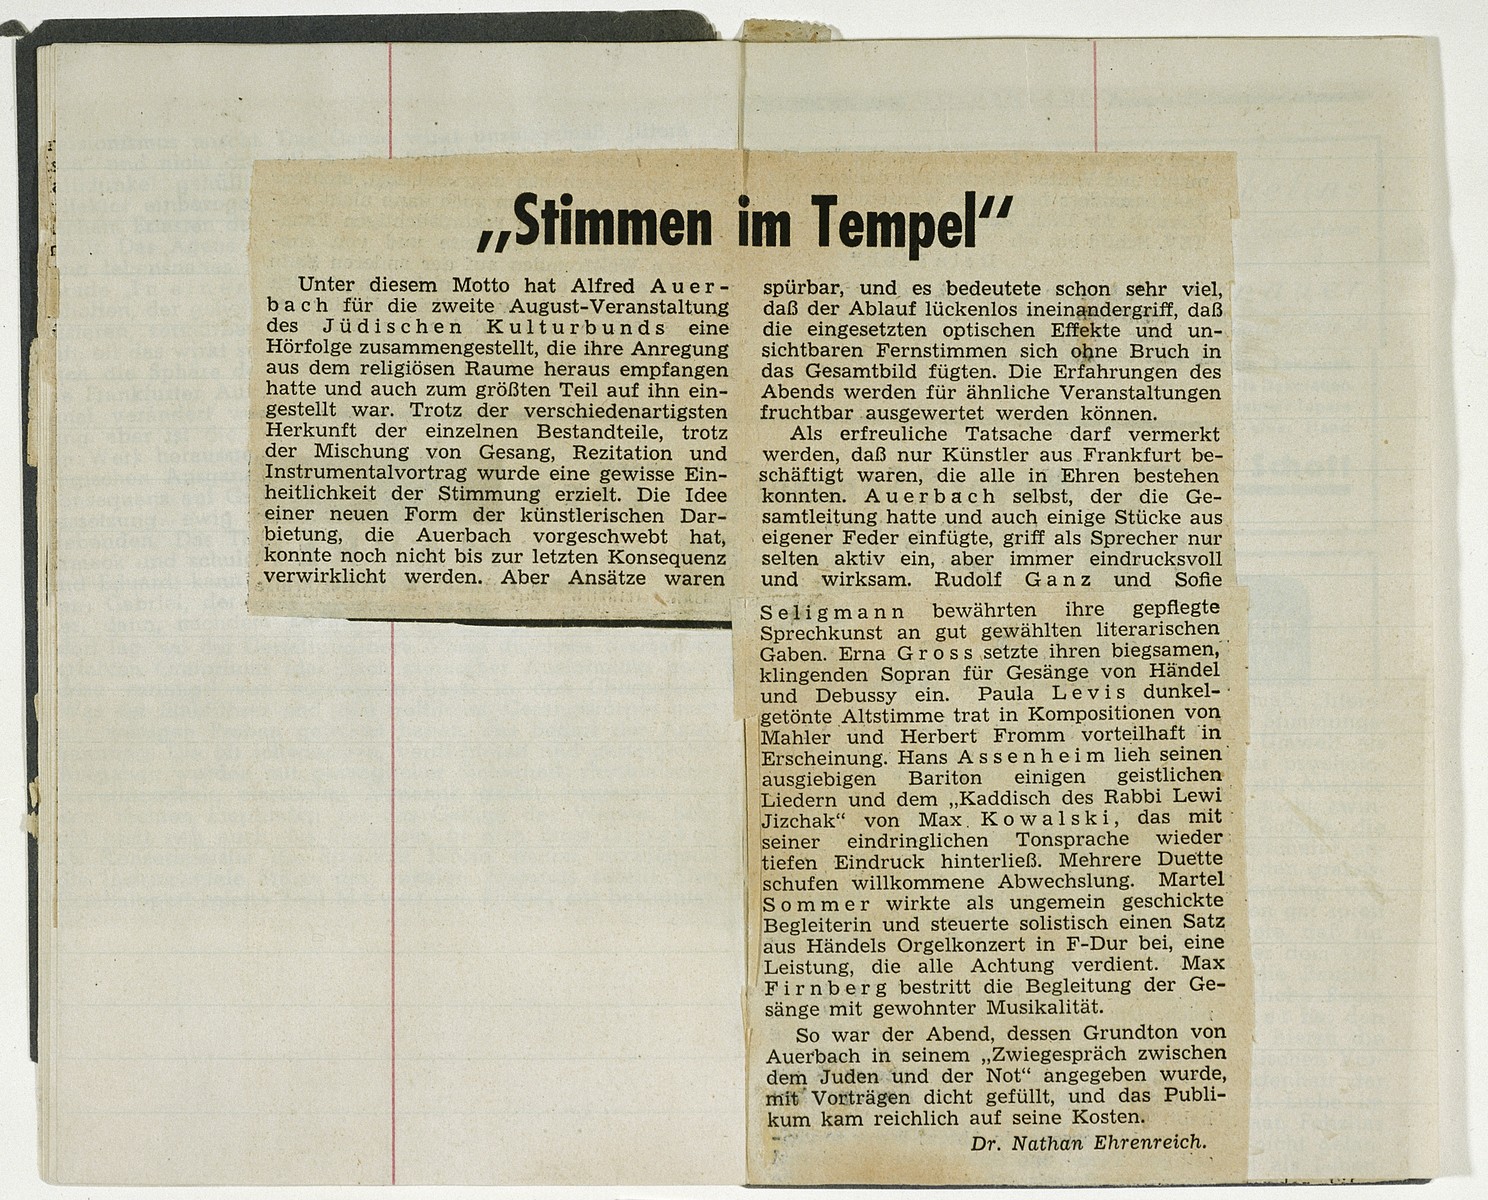 One page of a booklet containing newspaper clippings of concert reviews kept by Marthel Sommer, organist and pianist in the Juedischer Kulturbund [the Jewish Cultural Association] of Germany.